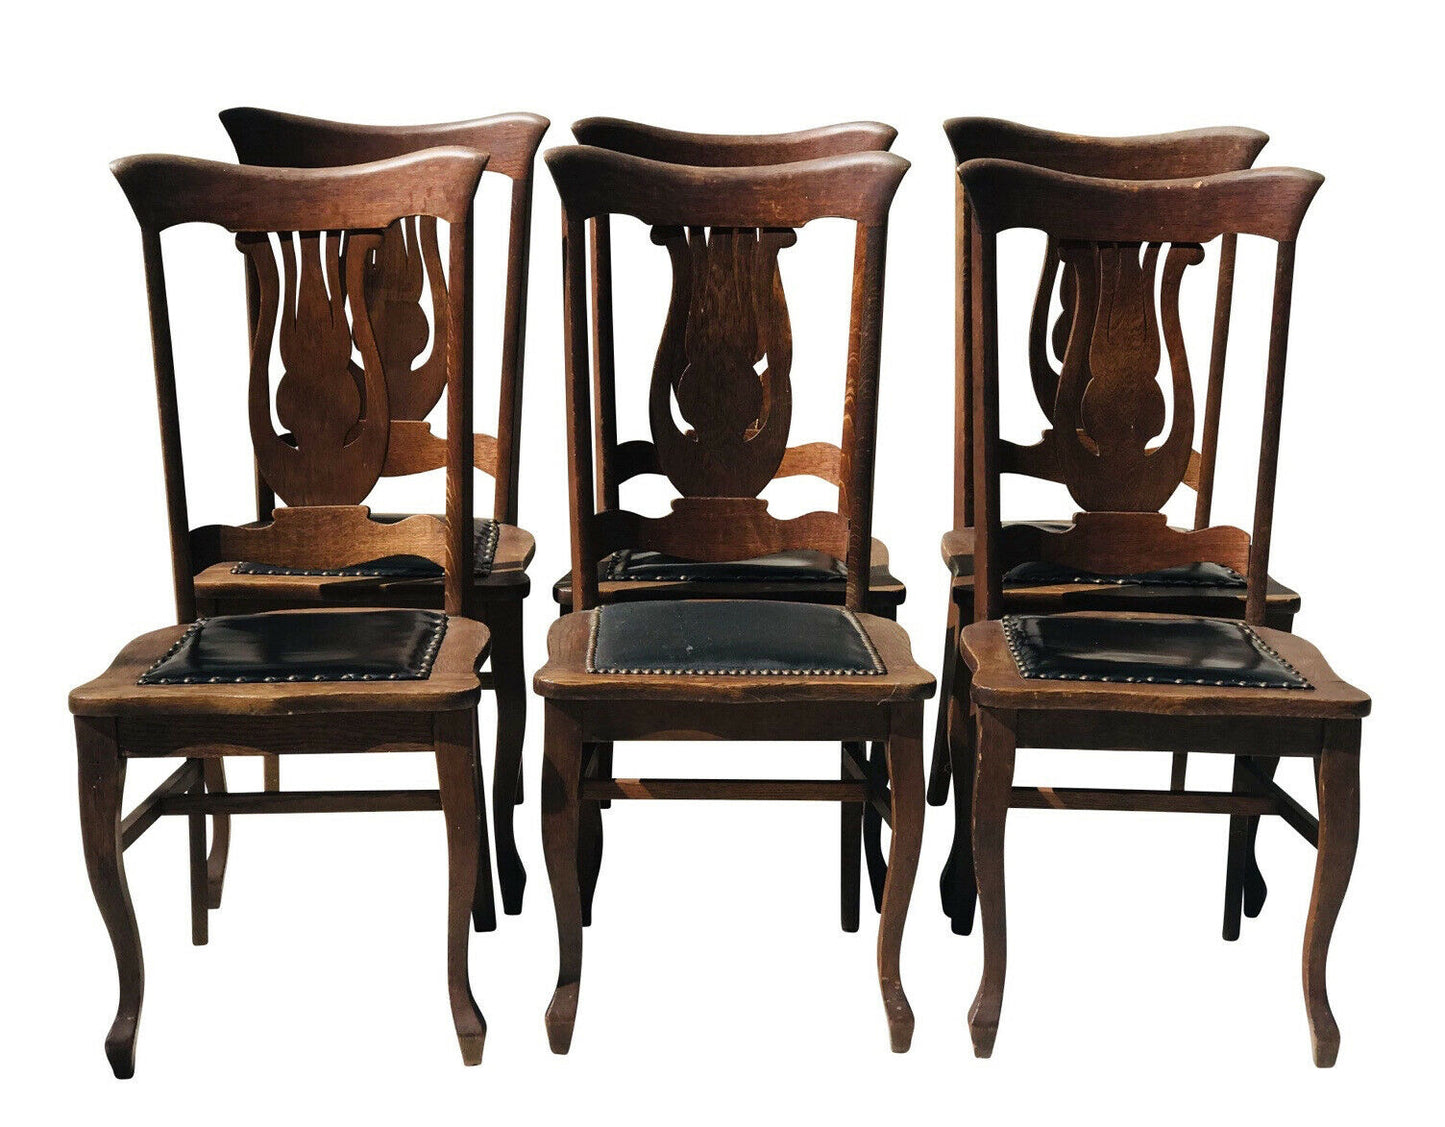 20TH C SET OF 6 ANTIQUE VICTORIAN TIGER OAK DINING CHAIRS  ~ SIKES CHAIR COMPANY